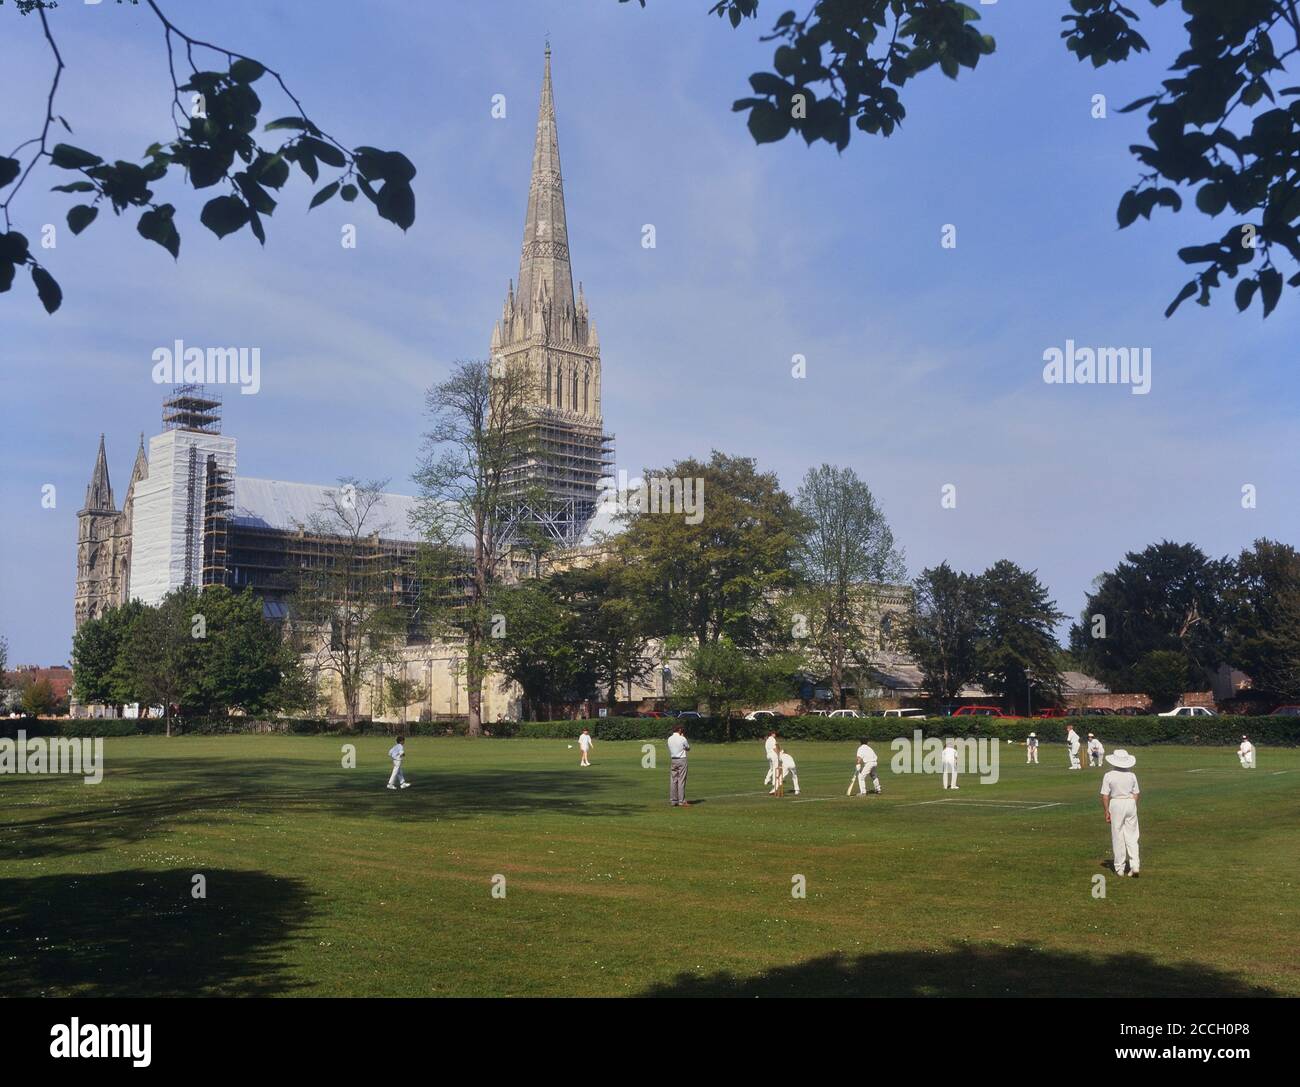 Boys cricket match being played within sight of Salisbury Cathedral, Wiltshire, England, UK. Circa 1990's Stock Photo